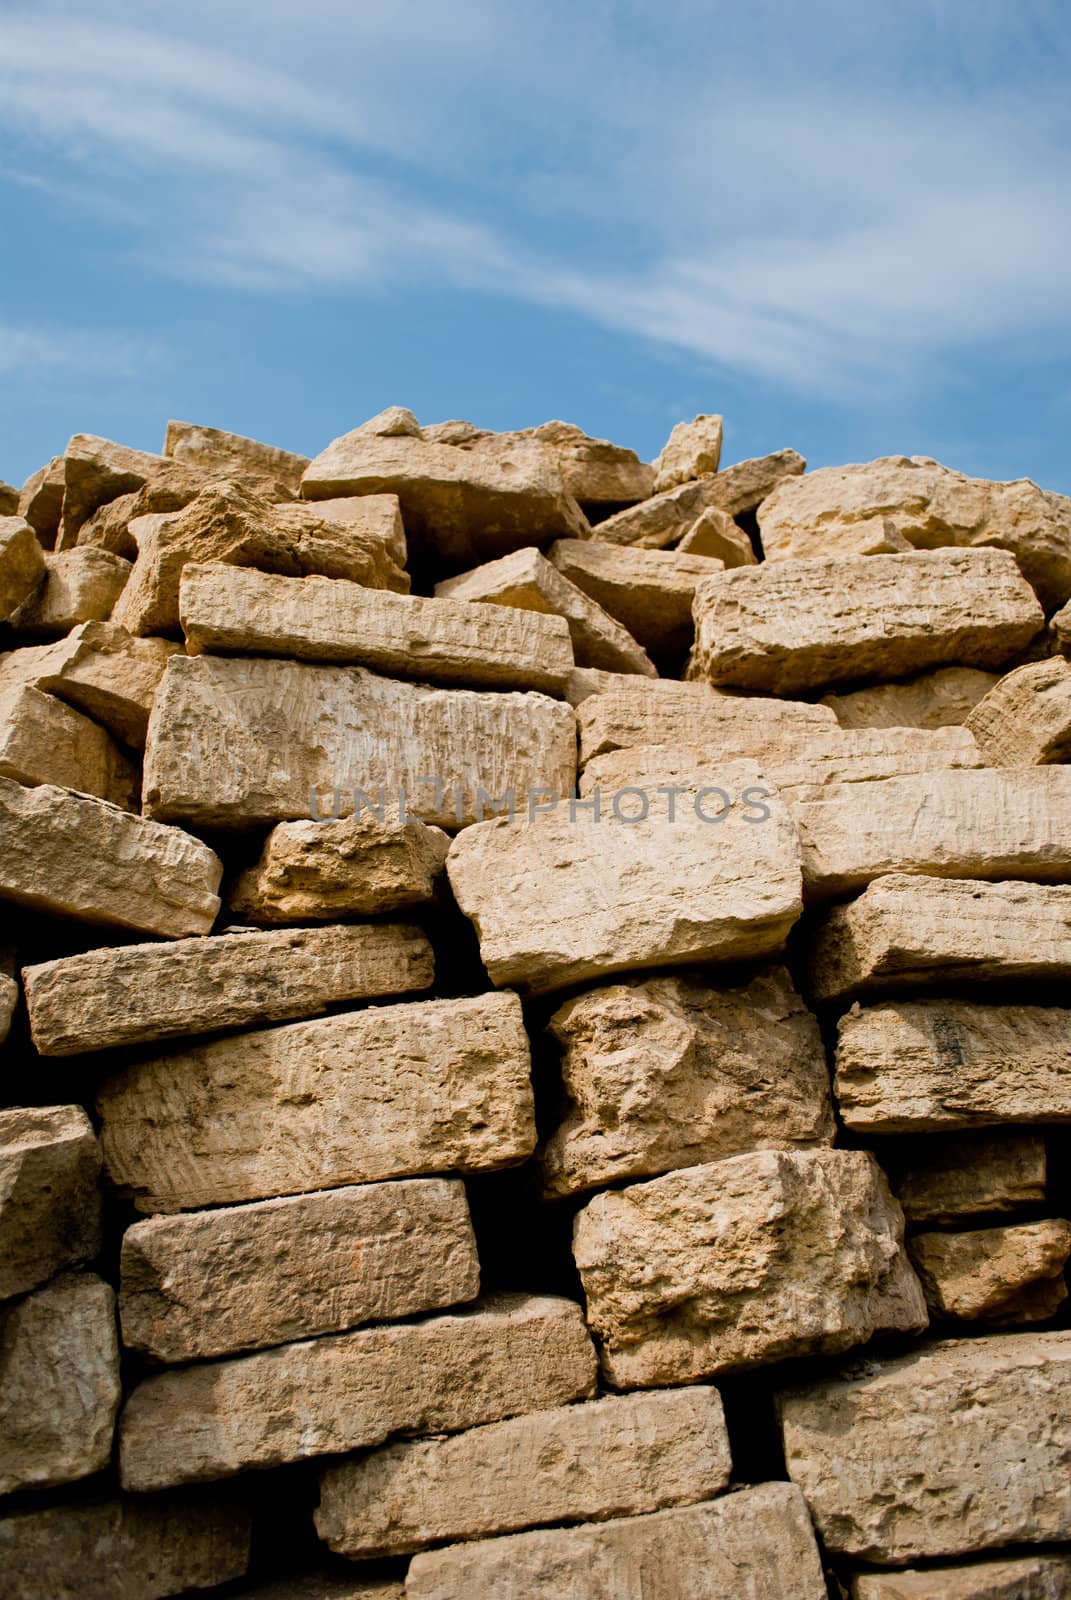 Stacked pile of bricks  under the sky.